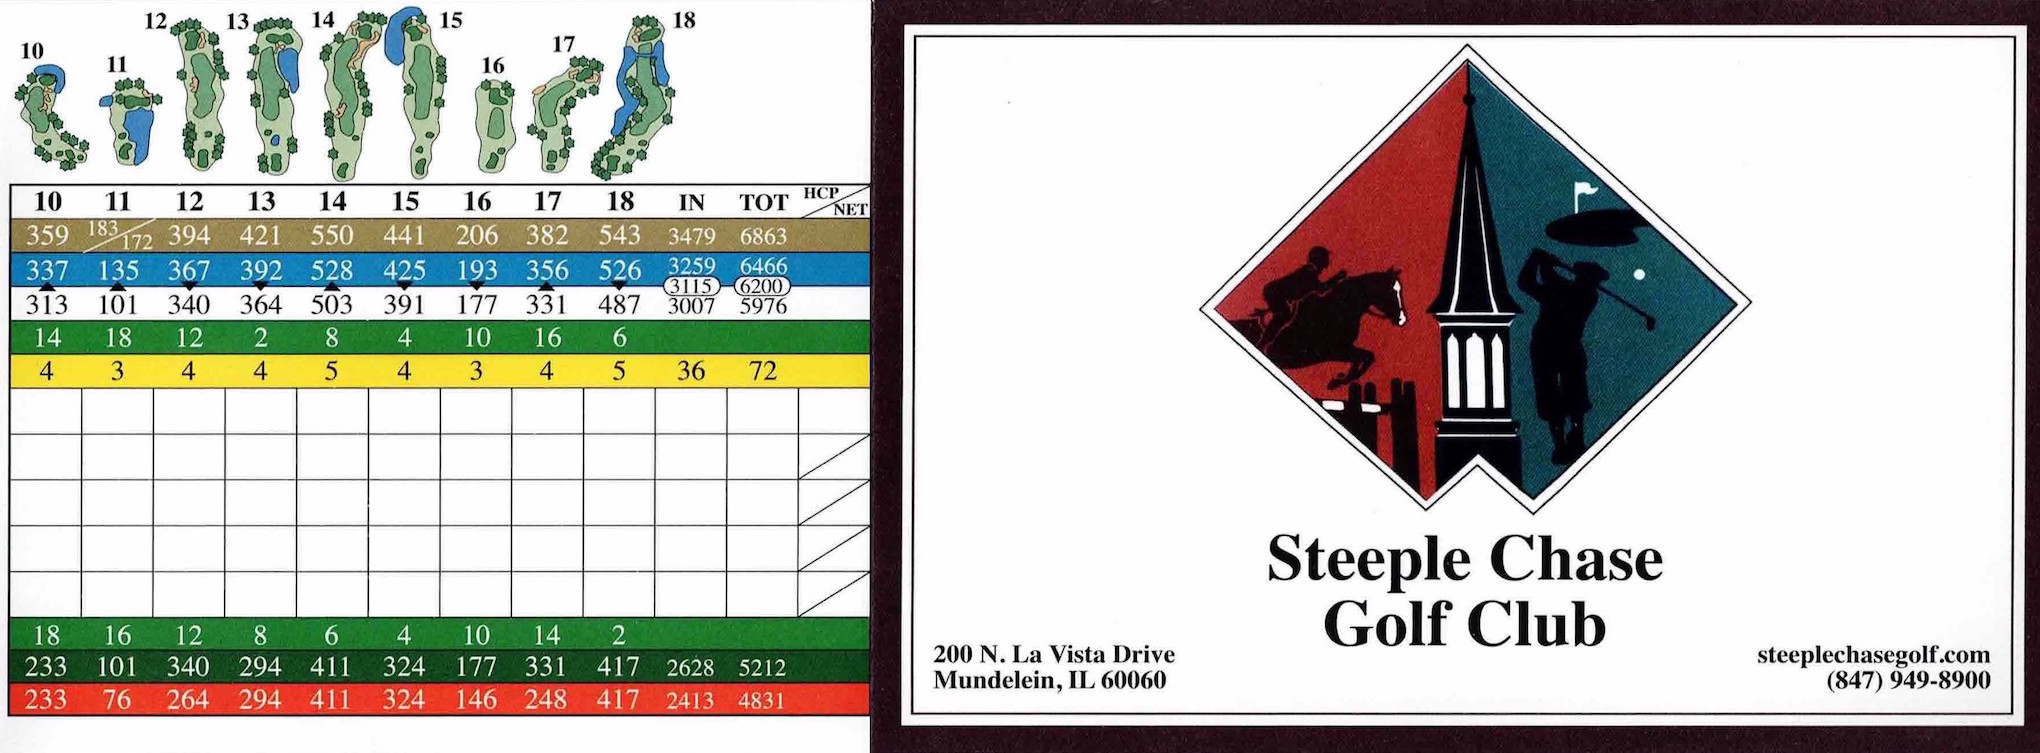 Scan of the scorecard from Steeple Chase Golf Club in Mundelein, Illinois. 